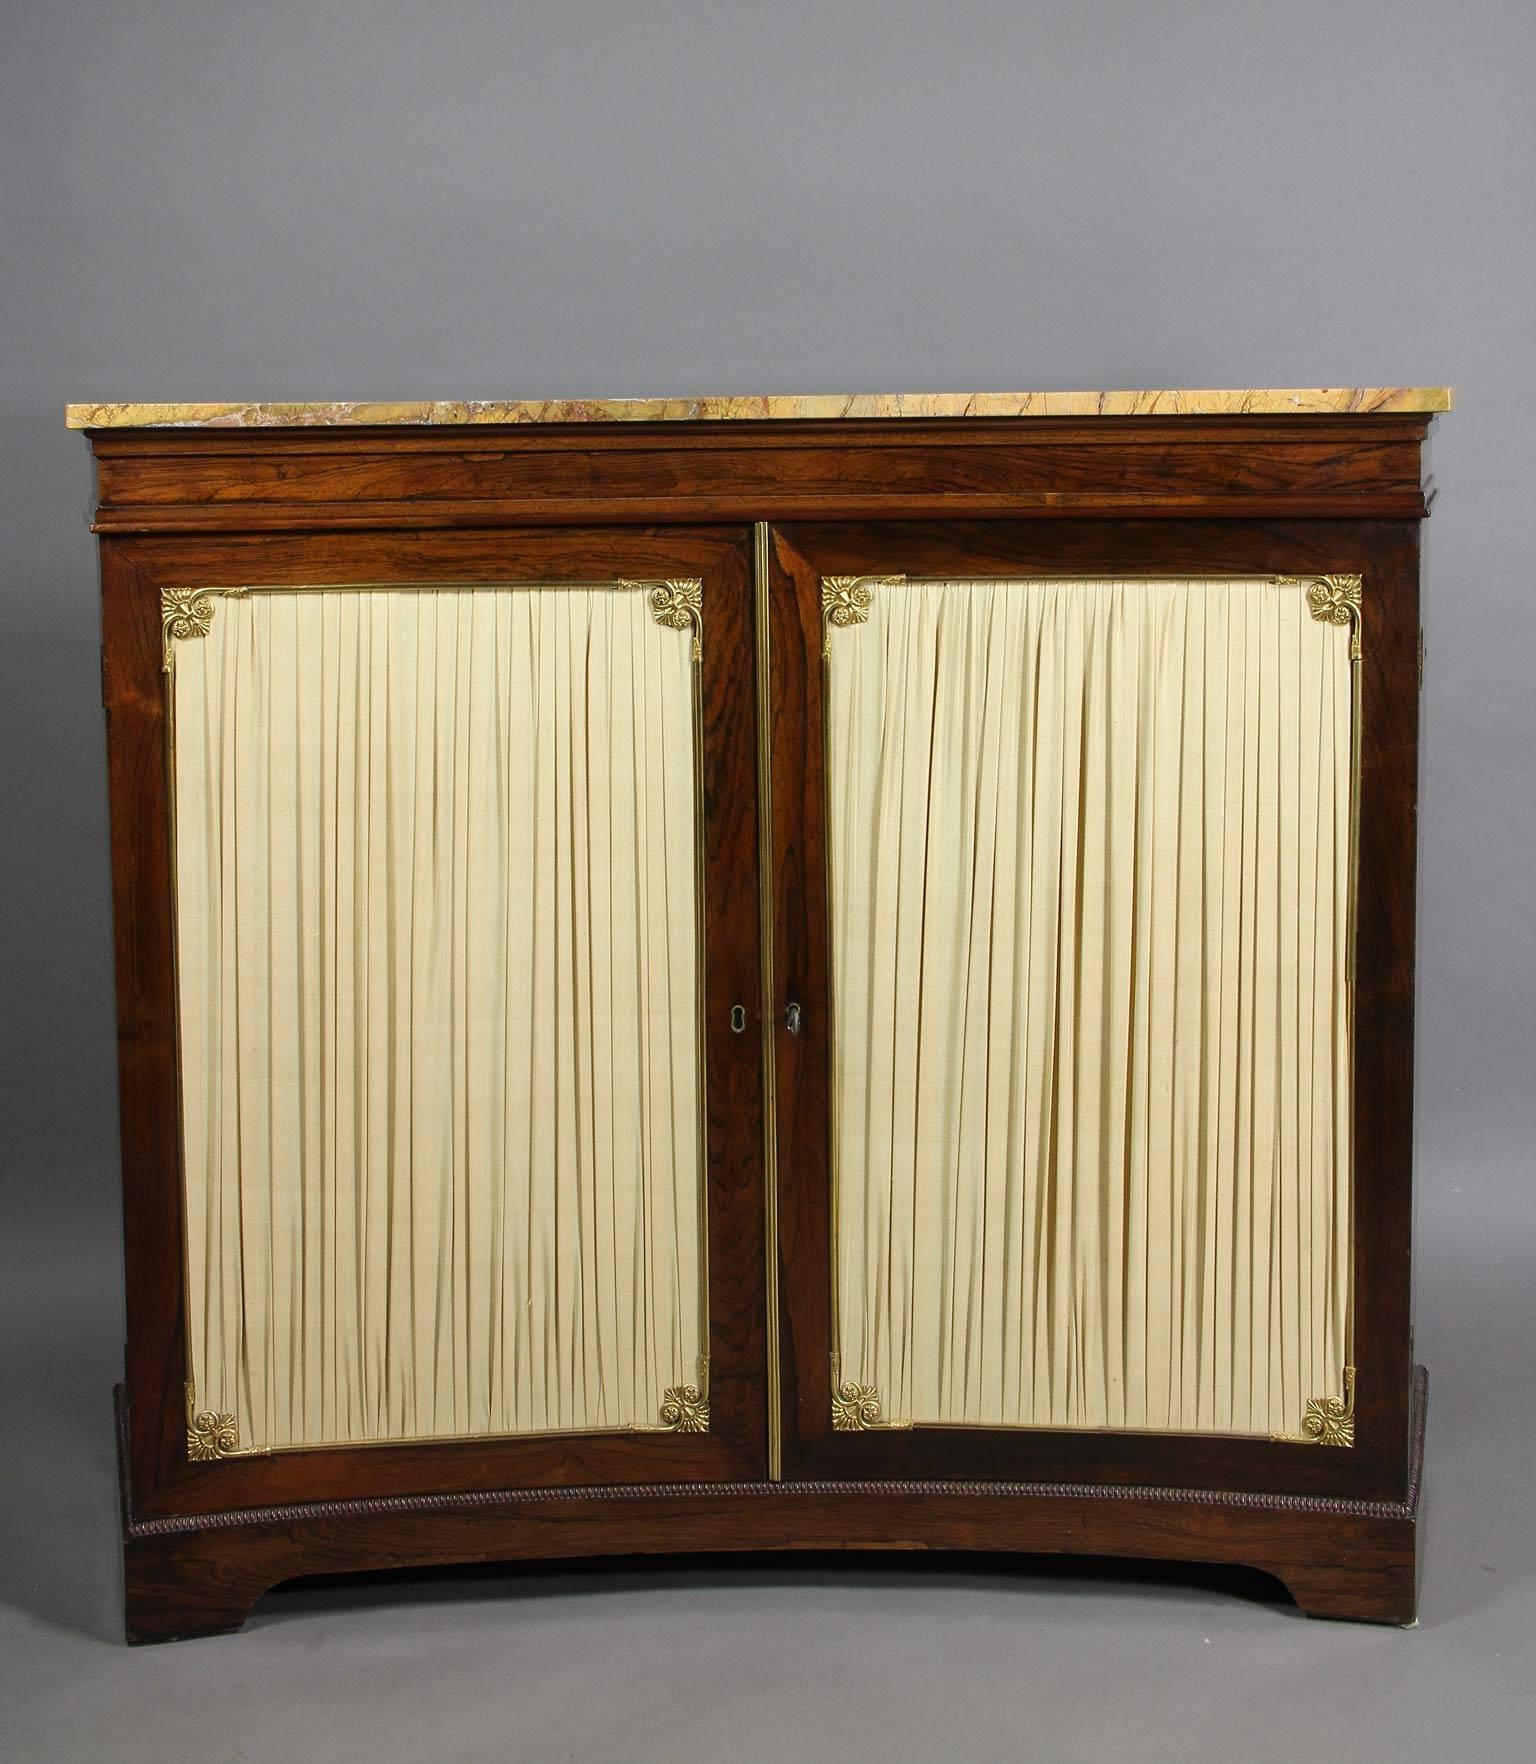 Of concave form with yellow marble top over a pair of pleated doors enclosing a shelf, bracket feet.